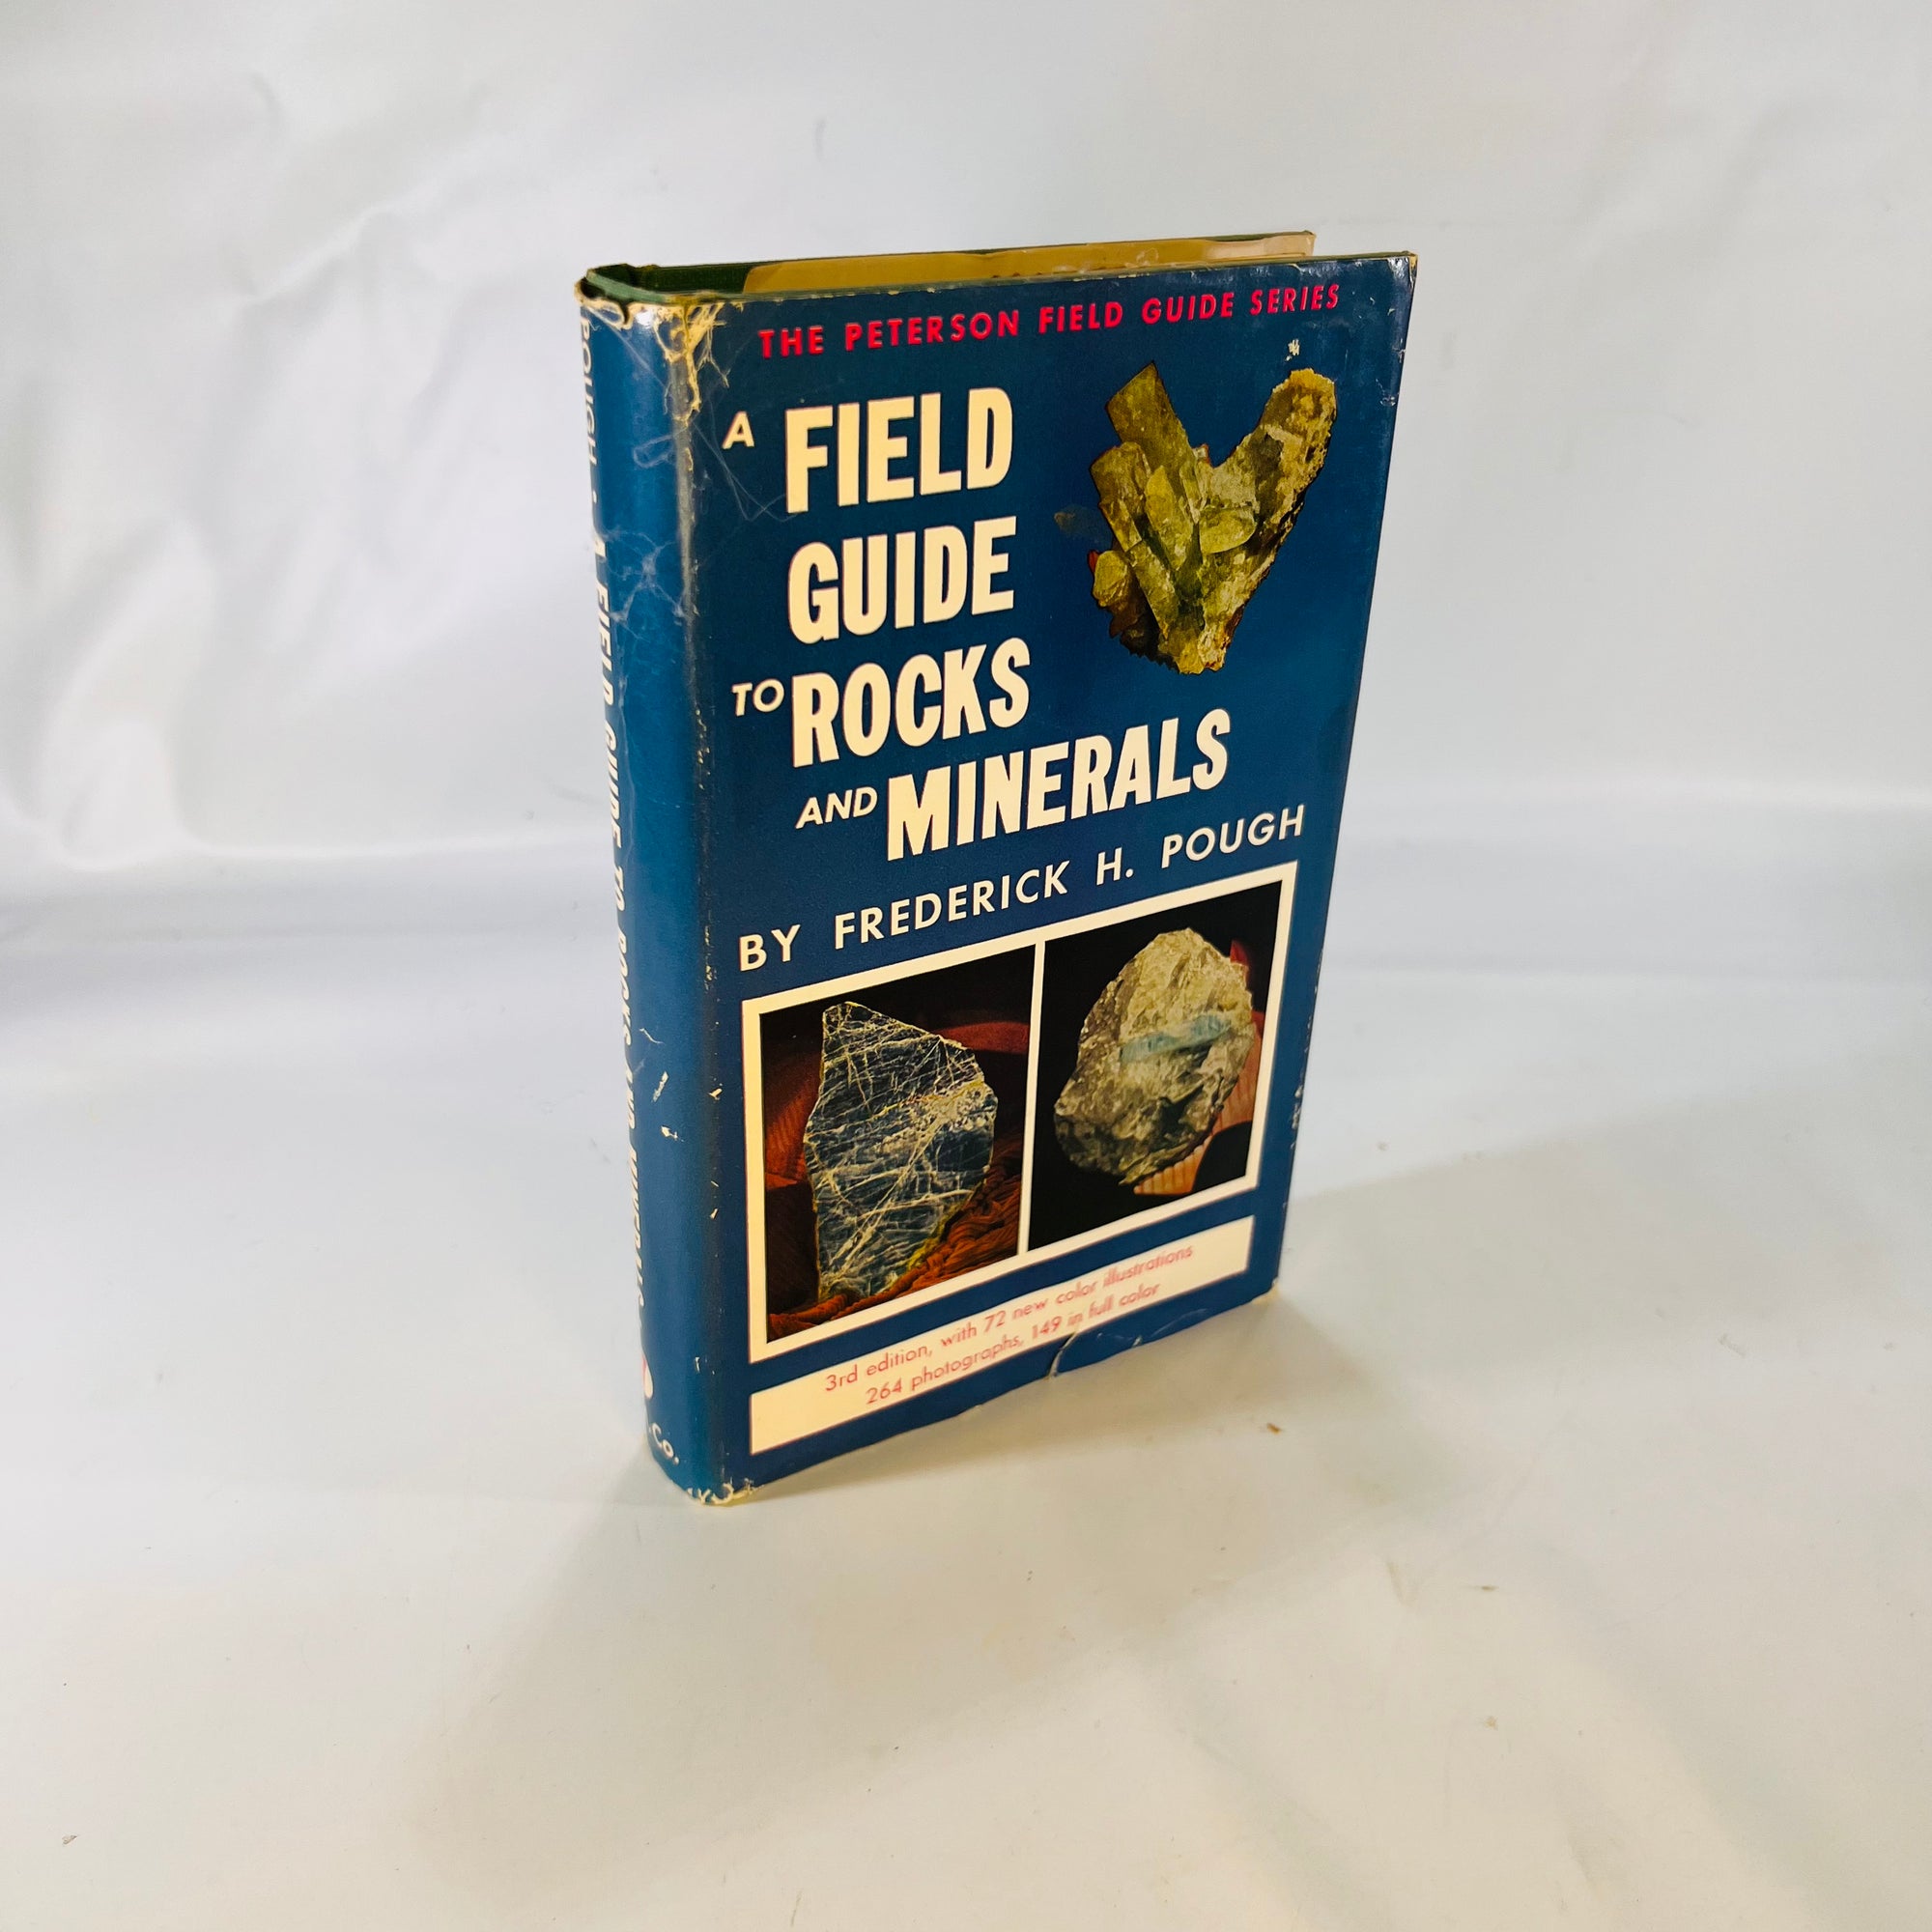 Field Guide to Rocks & Minerals by Frederick Pough 1960-Reading Vintage